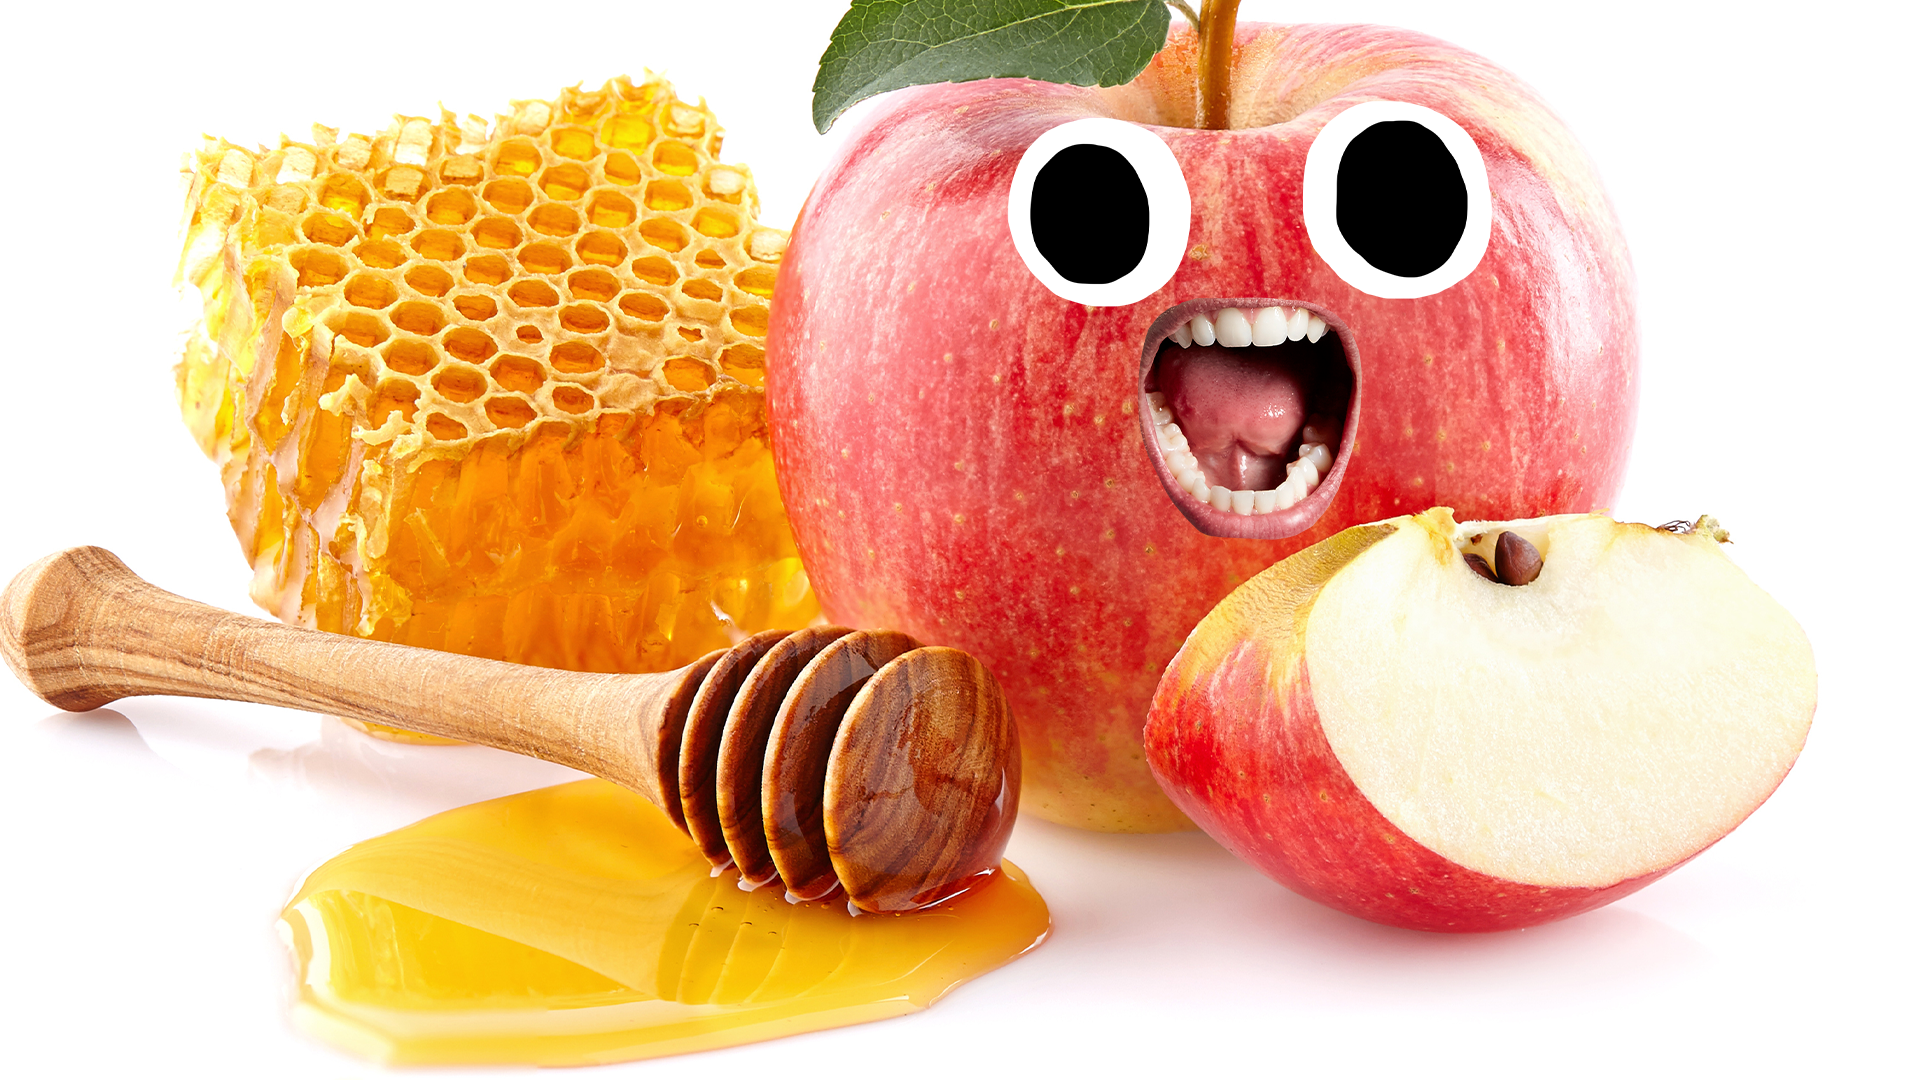 Honey and apple with face